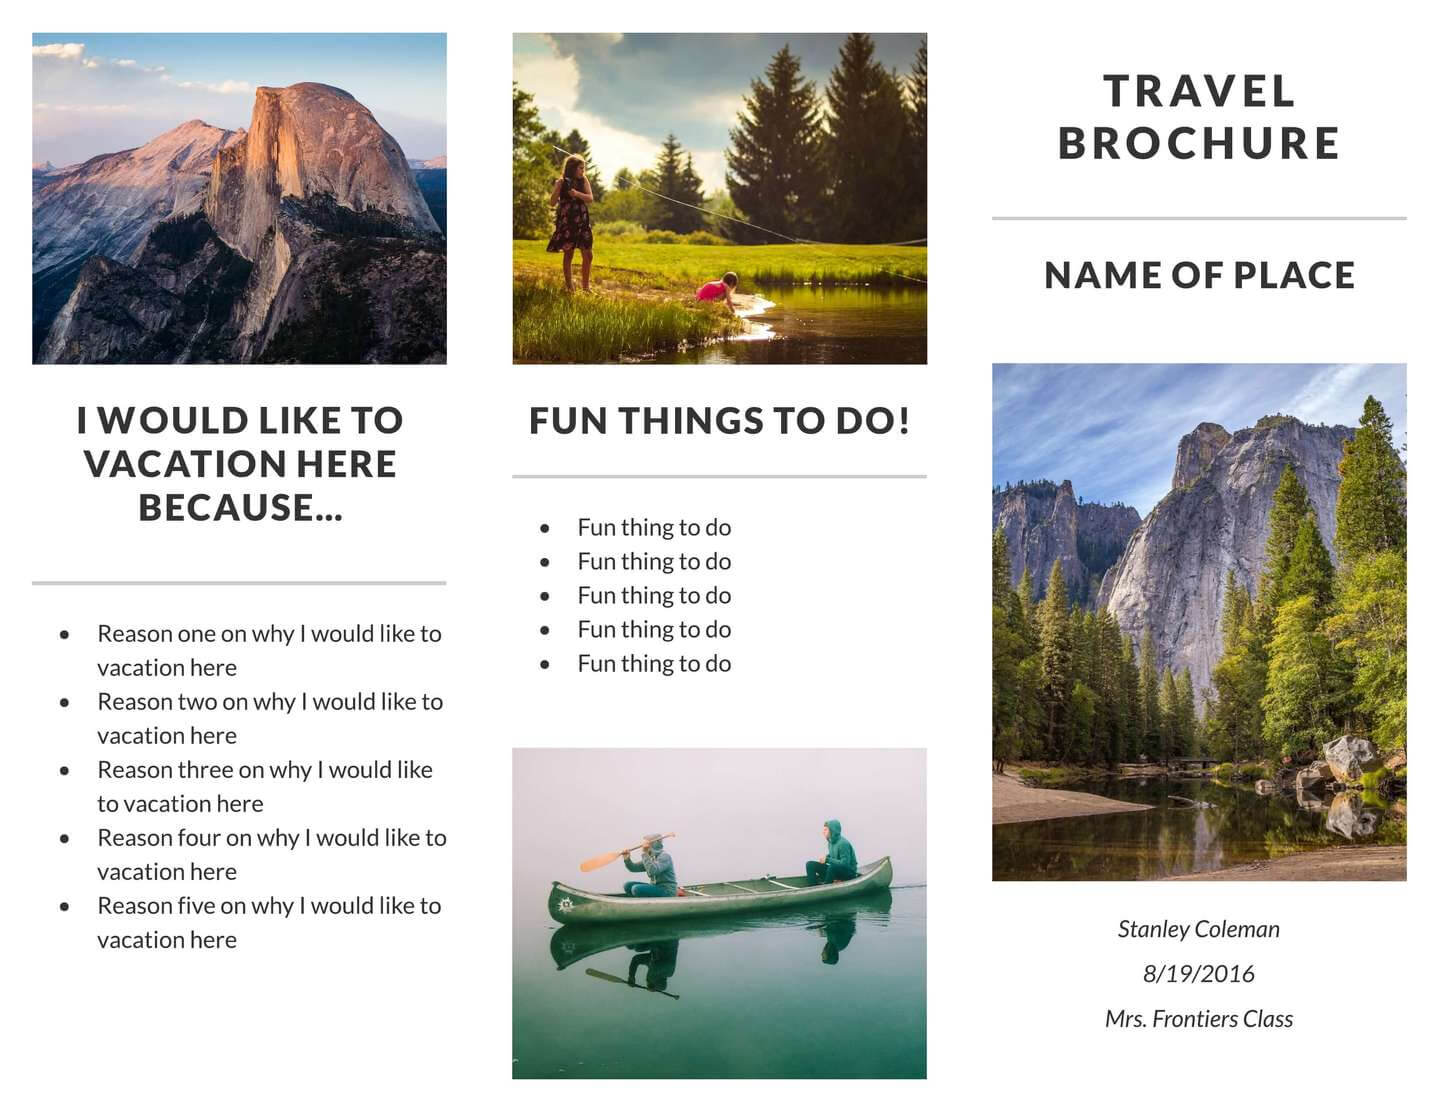 Free Travel Brochure Templates & Examples [8 Free Templates] Throughout Travel And Tourism Brochure Templates Free